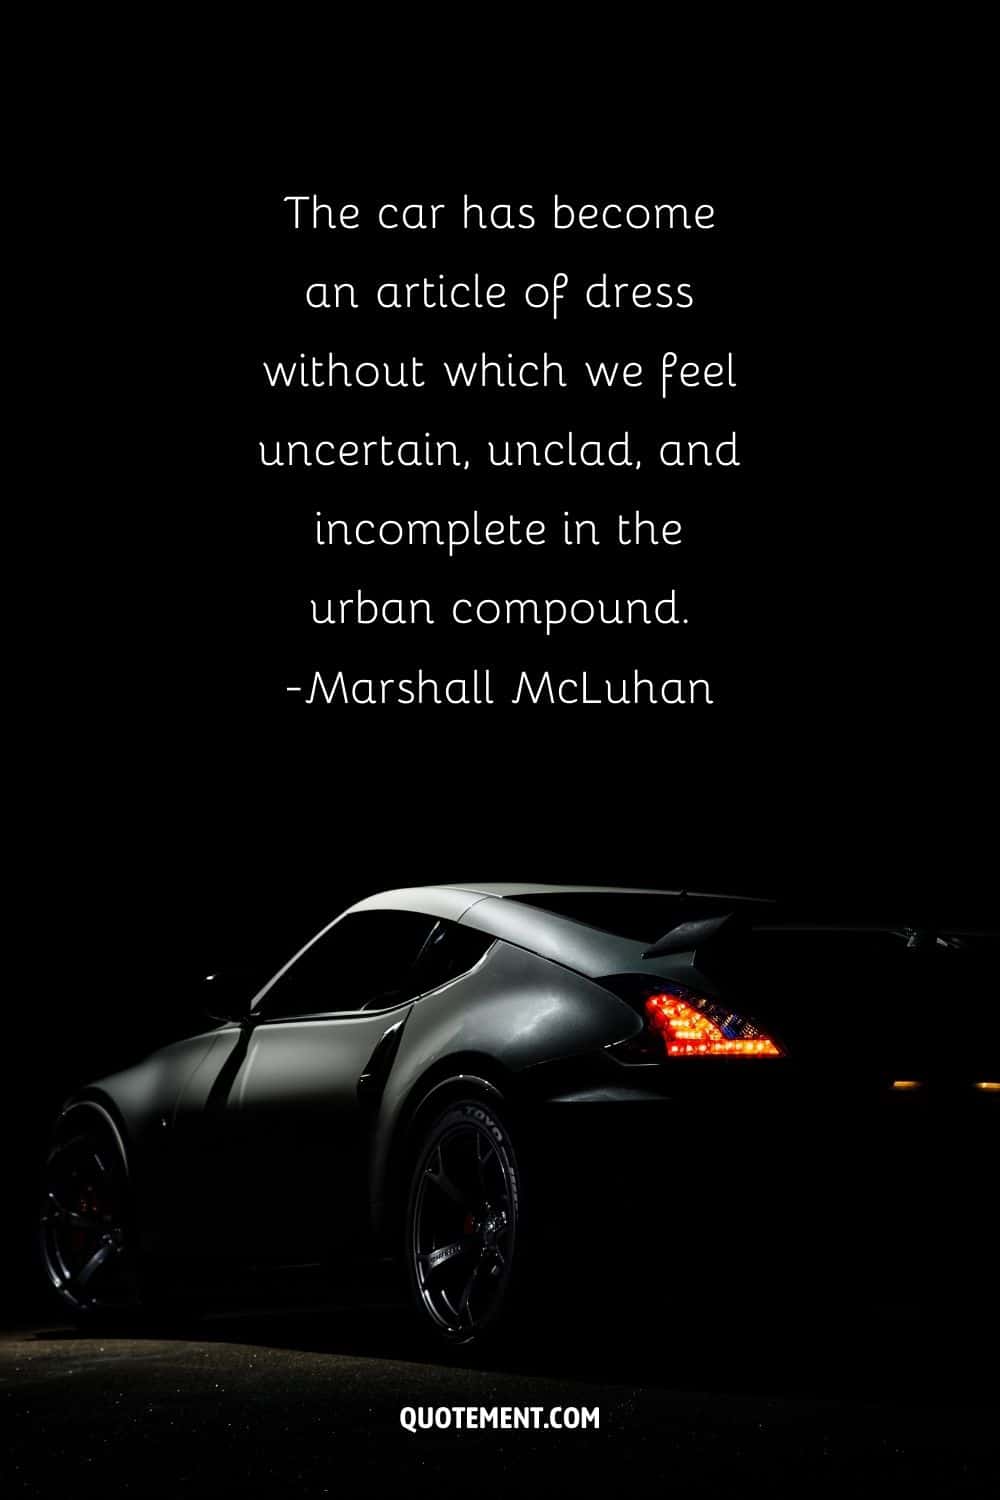 “The car has become an article of dress without which we feel uncertain, unclad, and incomplete in the urban compound.” ― Marshall McLuhan